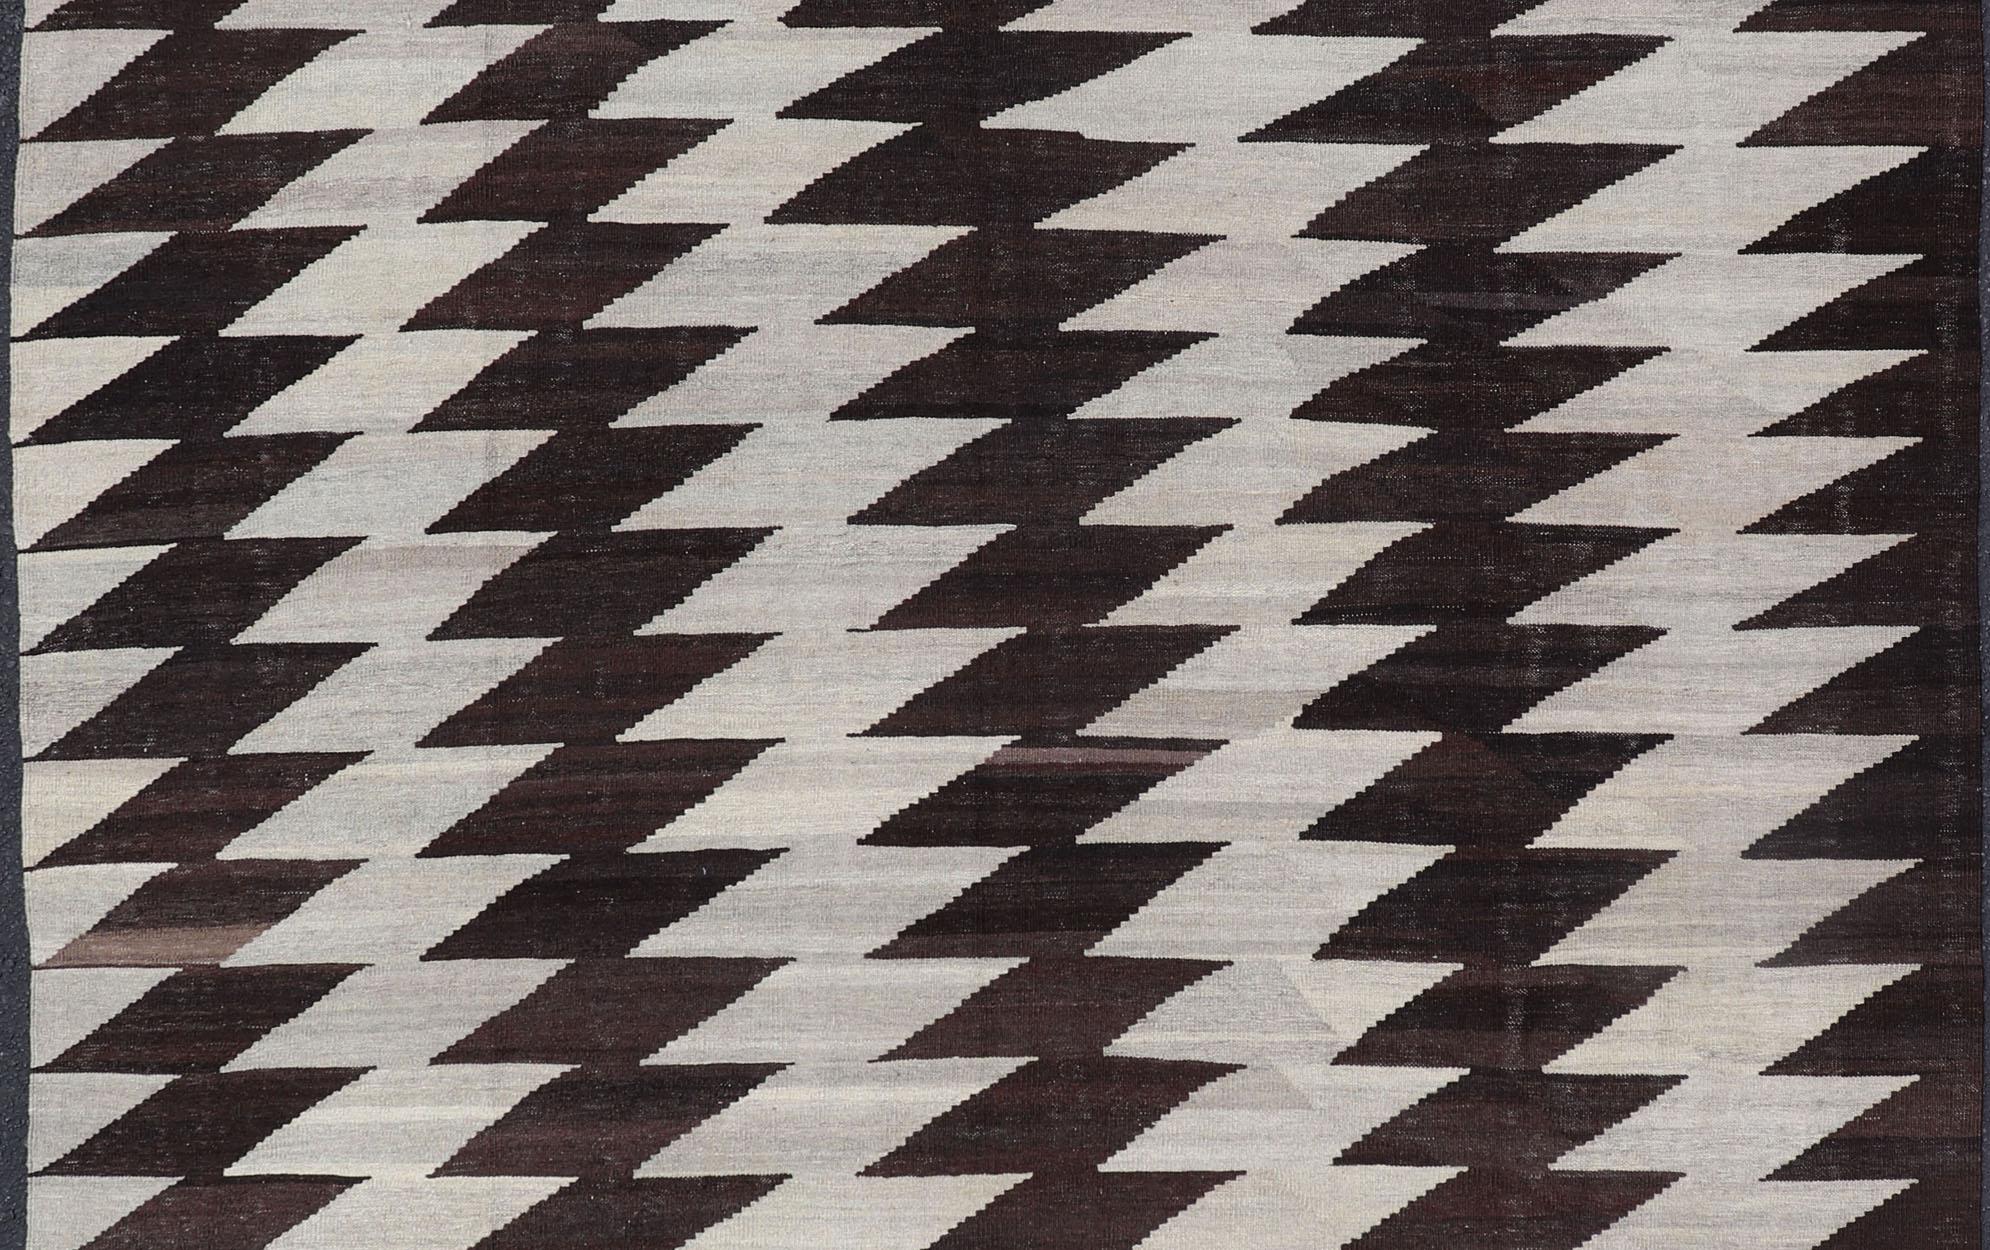 Hand-Woven Afghanistan Kilim with Modern Design With Browns and Gray For Sale